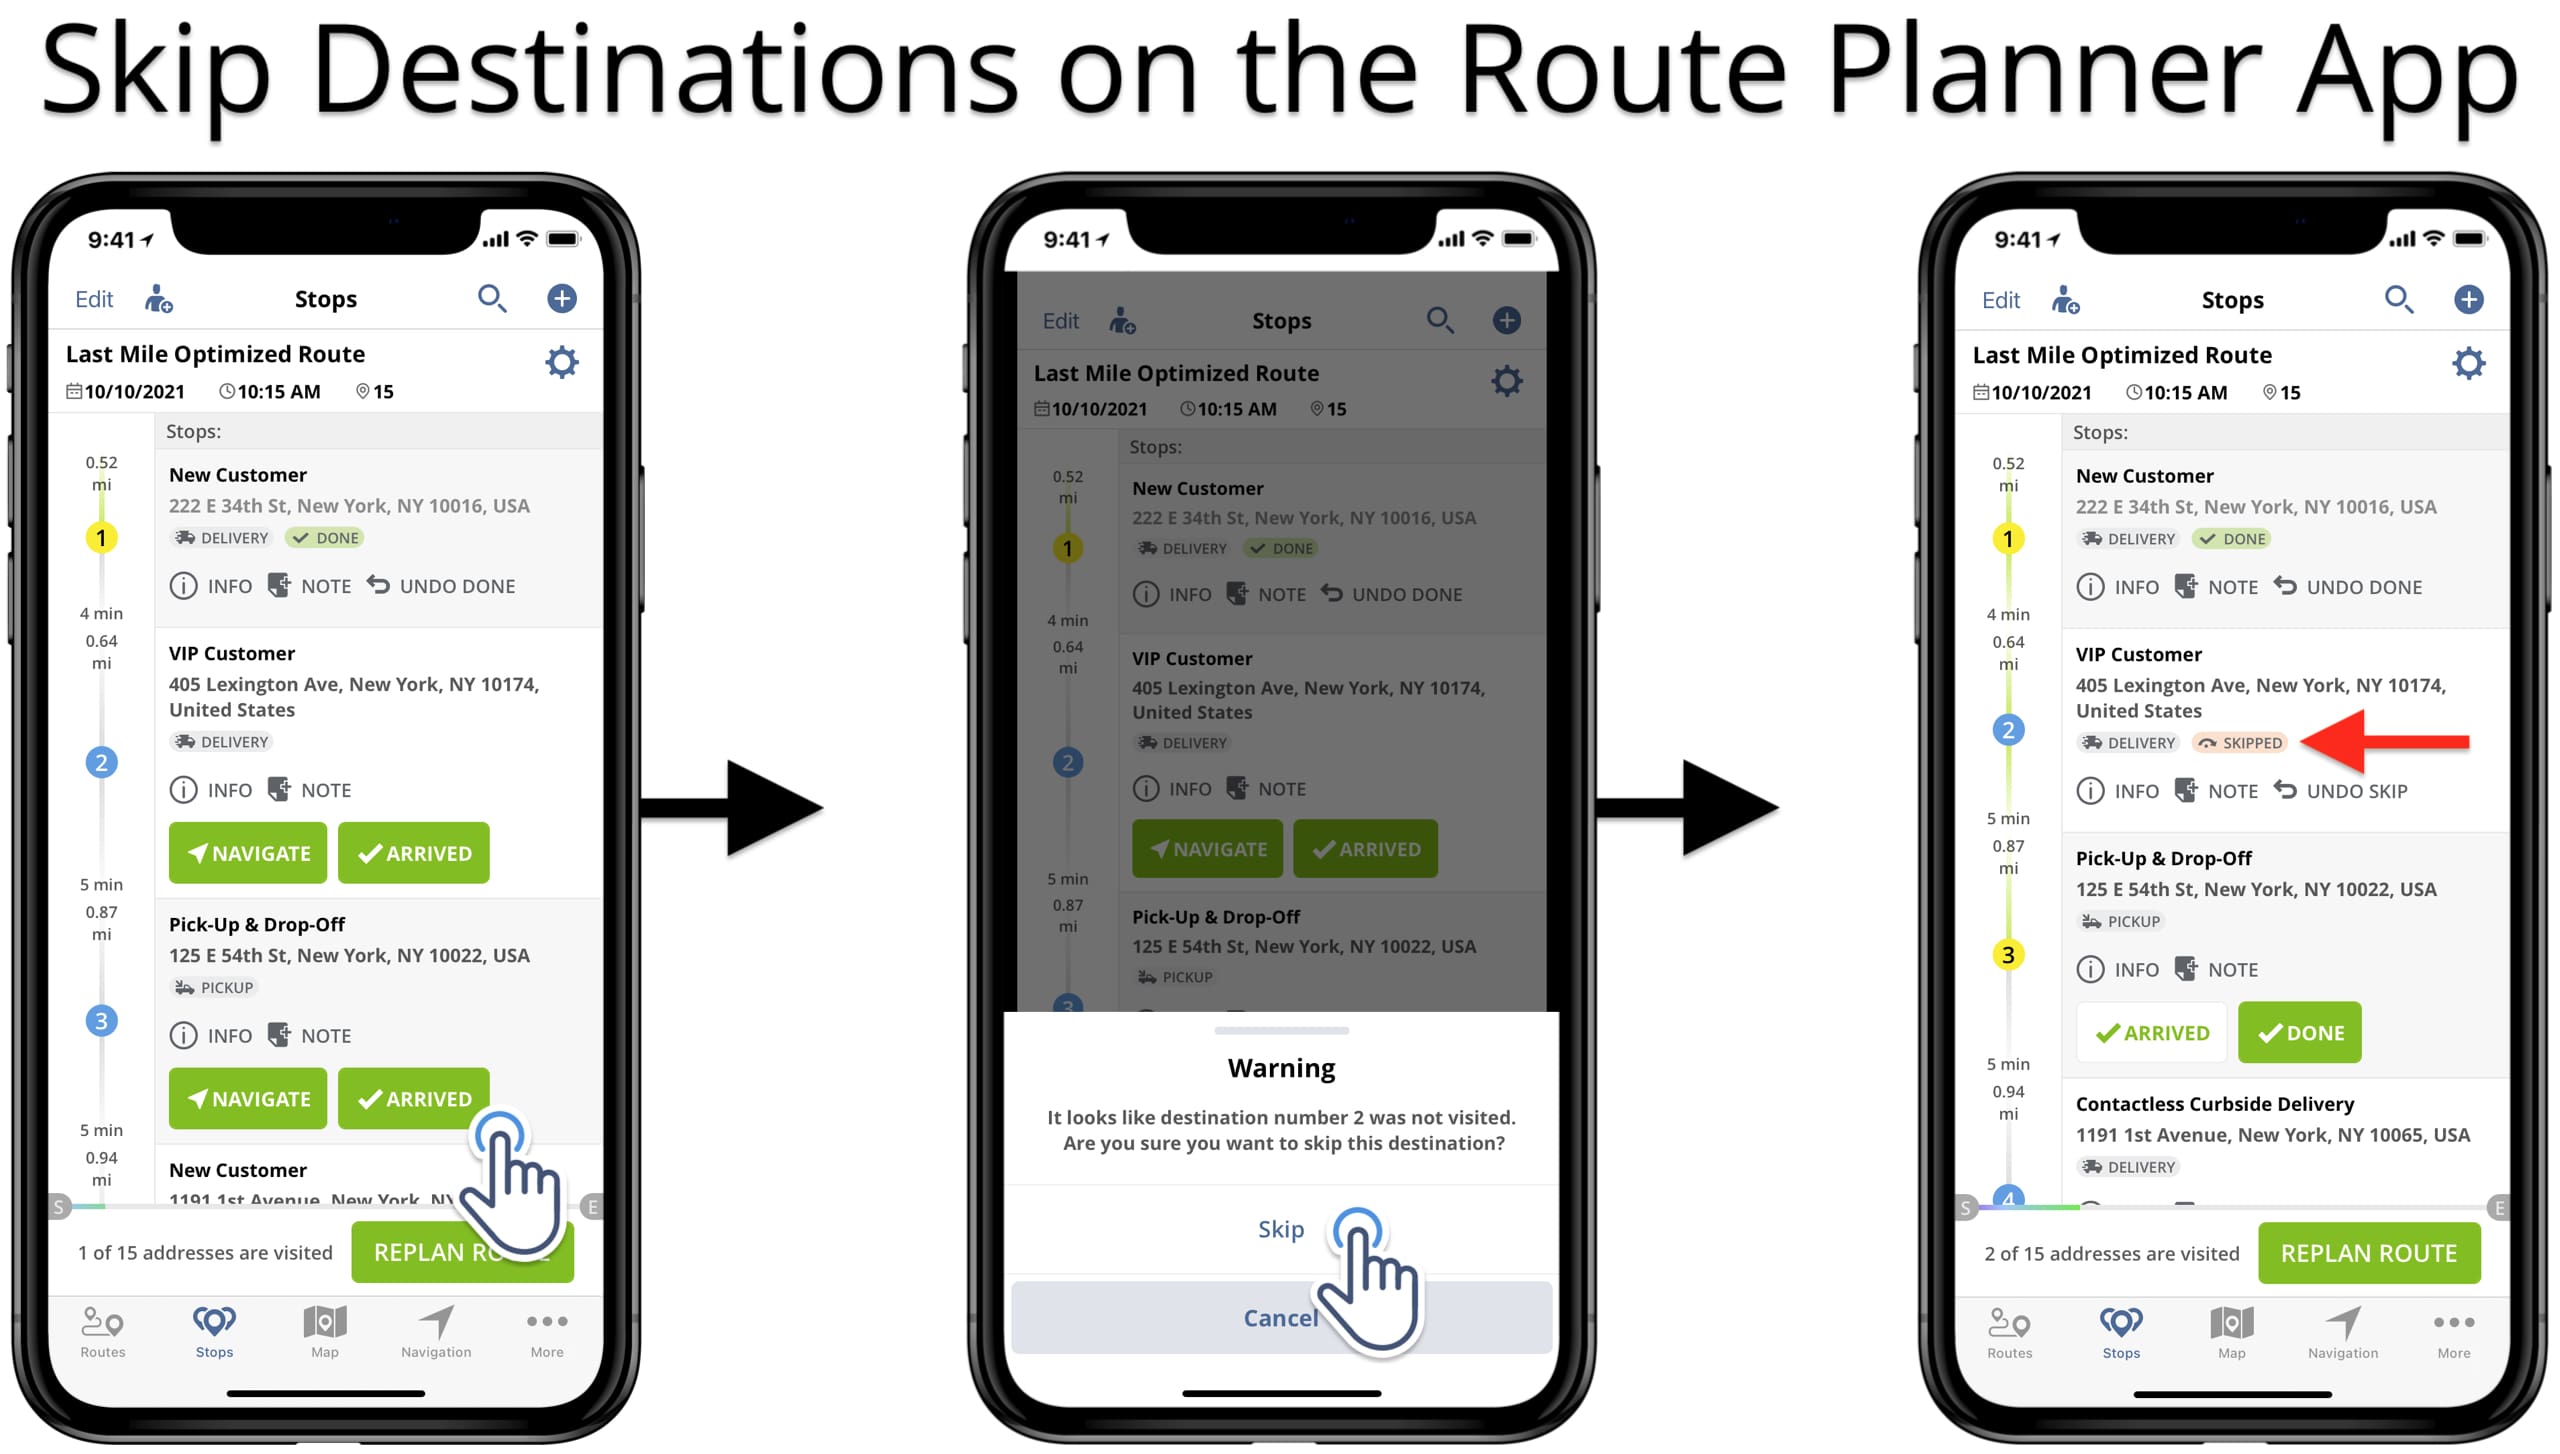 Skip route destinations and track route progress on the iOS Route Planner app for iPhone.